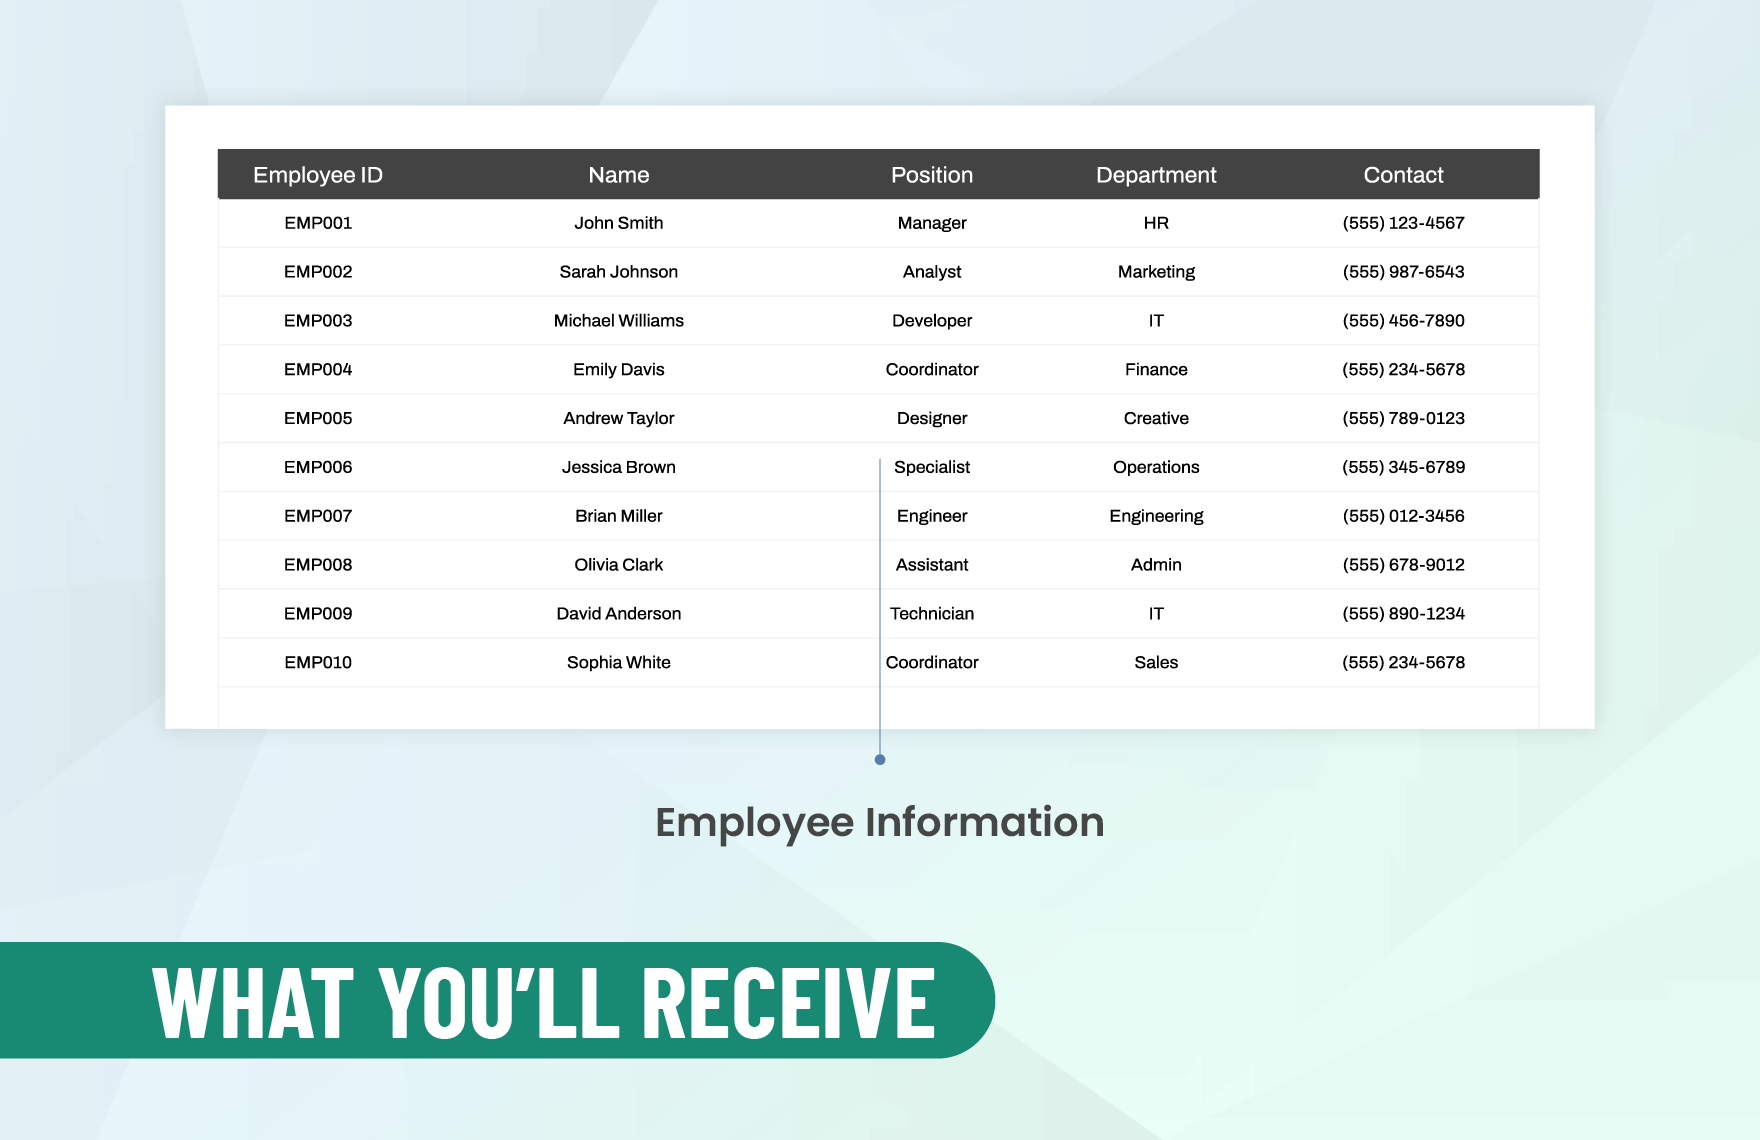 Corporate Paystub Template